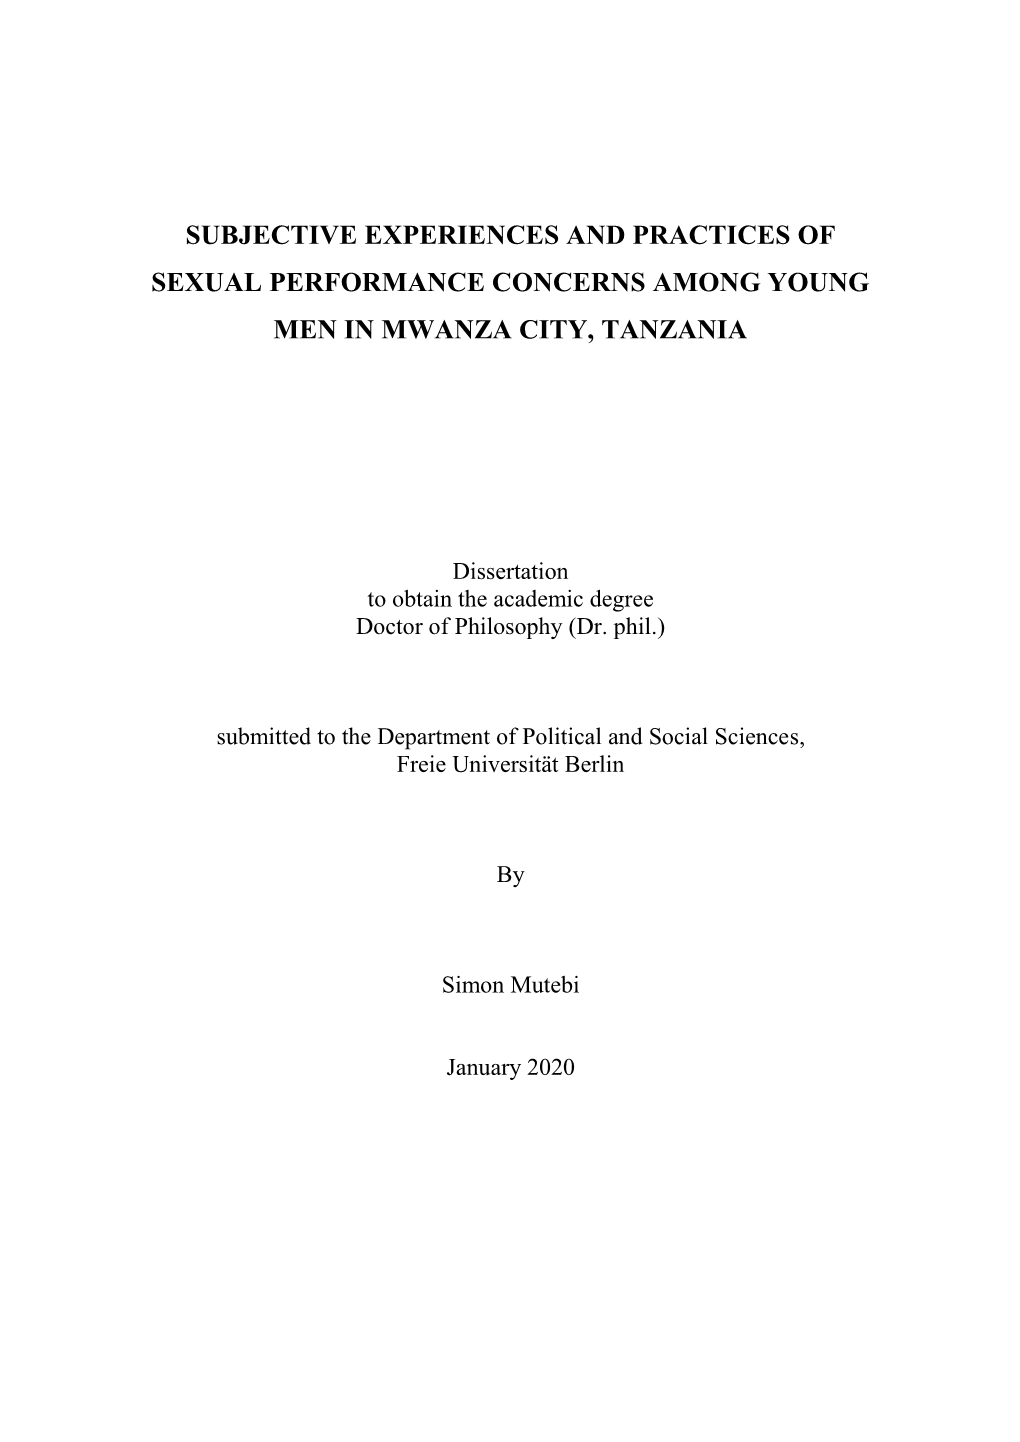 Subjective Experiences and Practices of Sexual Performance Concerns Among Young Men in Mwanza City, Tanzania